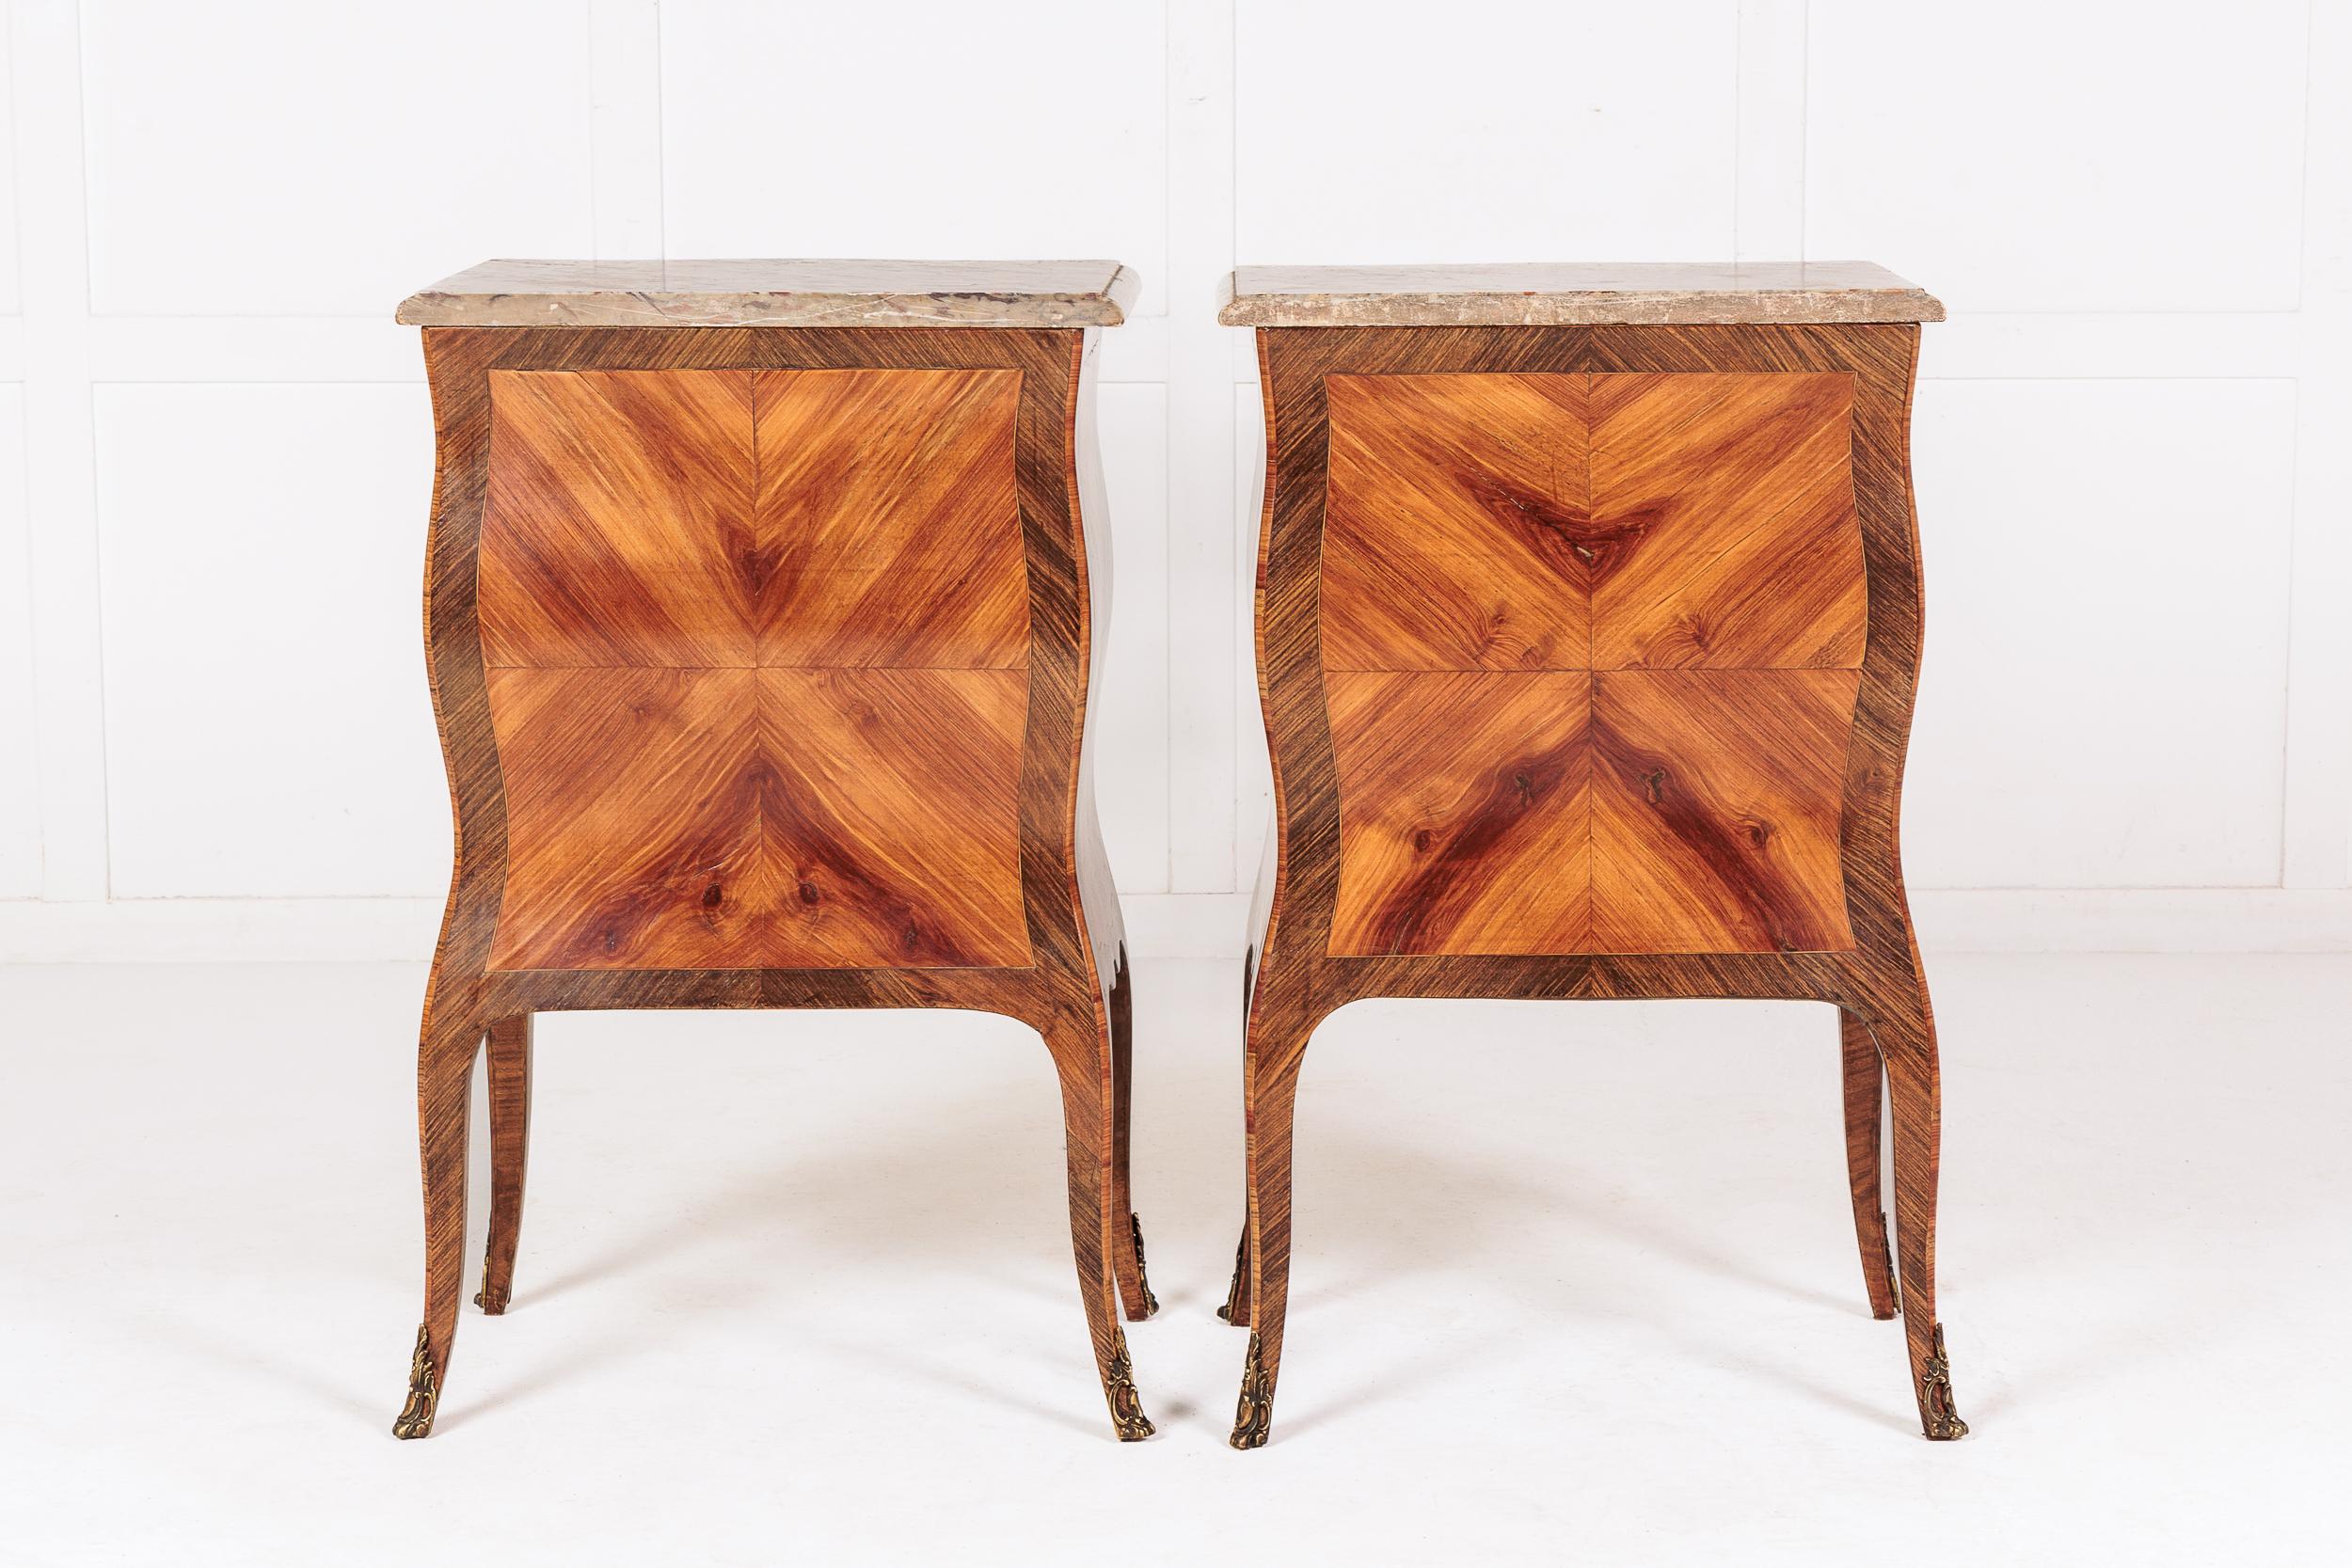 Pair of 19th Century Italian Bedside Cabinets with Marble Tops For Sale 4